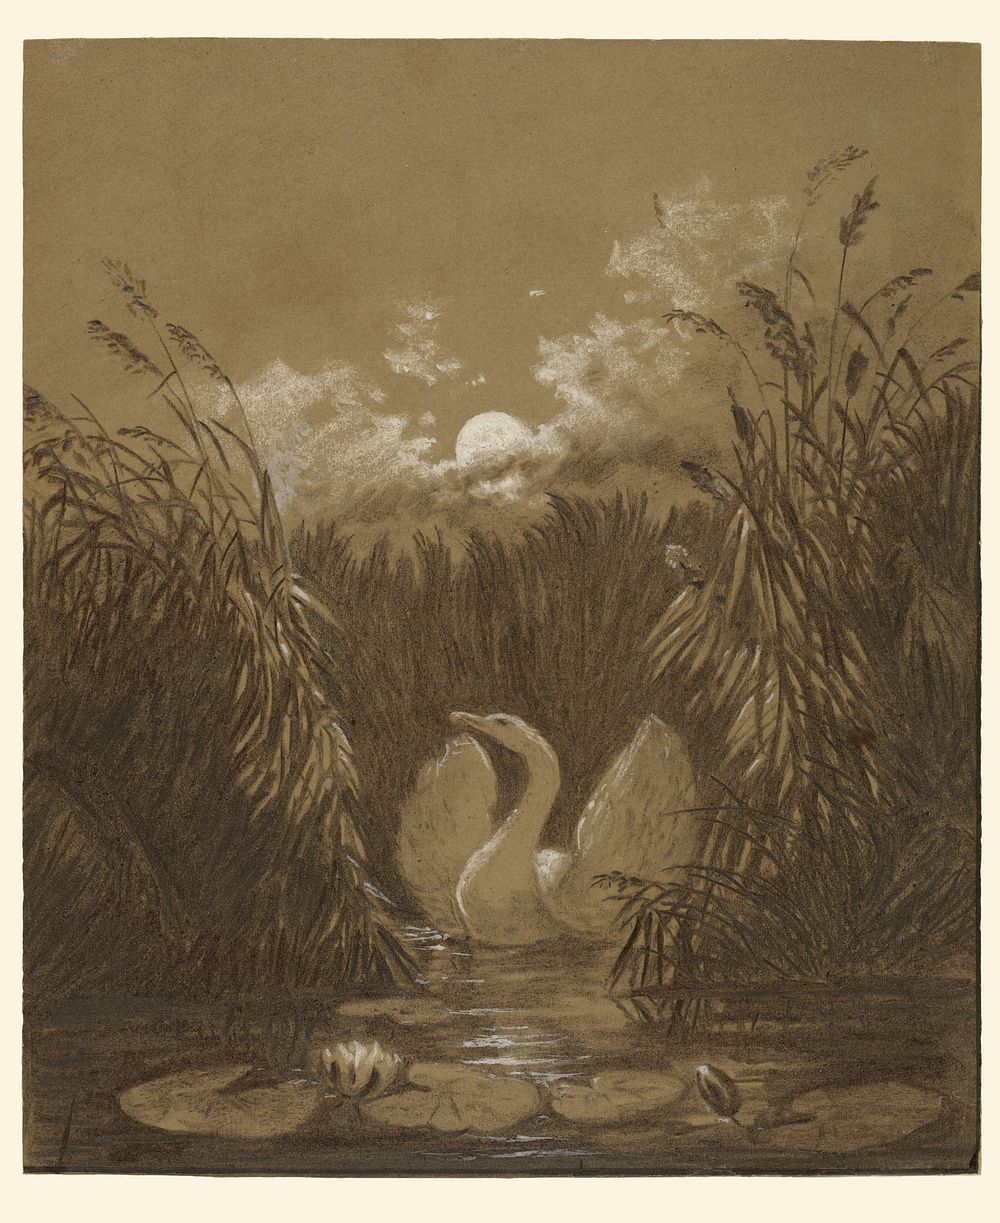 A Swan Among the Reeds, by Moonlight by Carl Gustav Carus